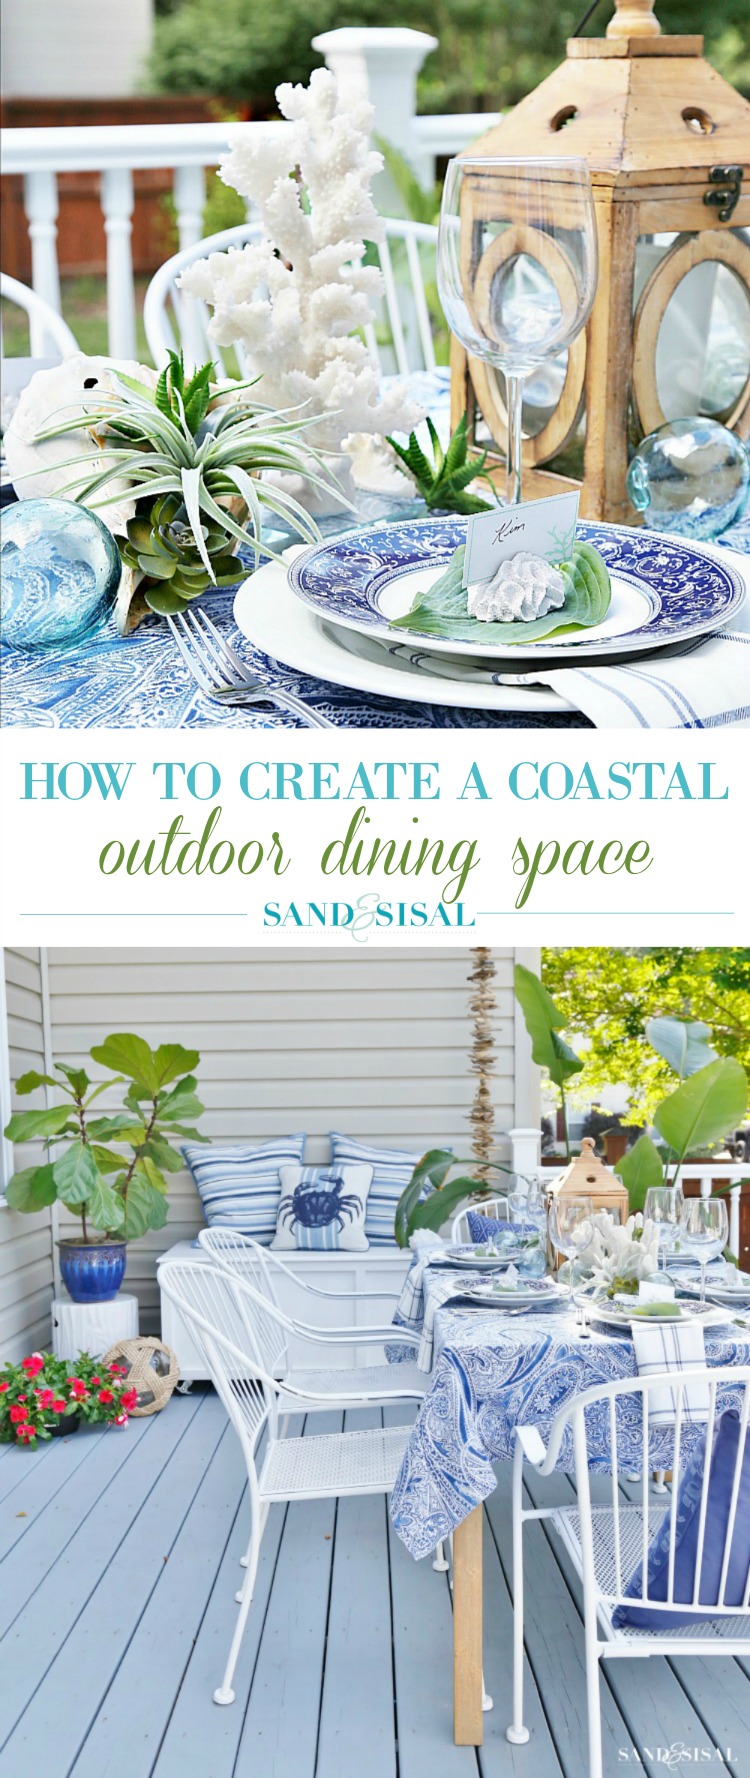 How to Create A Coastal Outdoor Dining Space